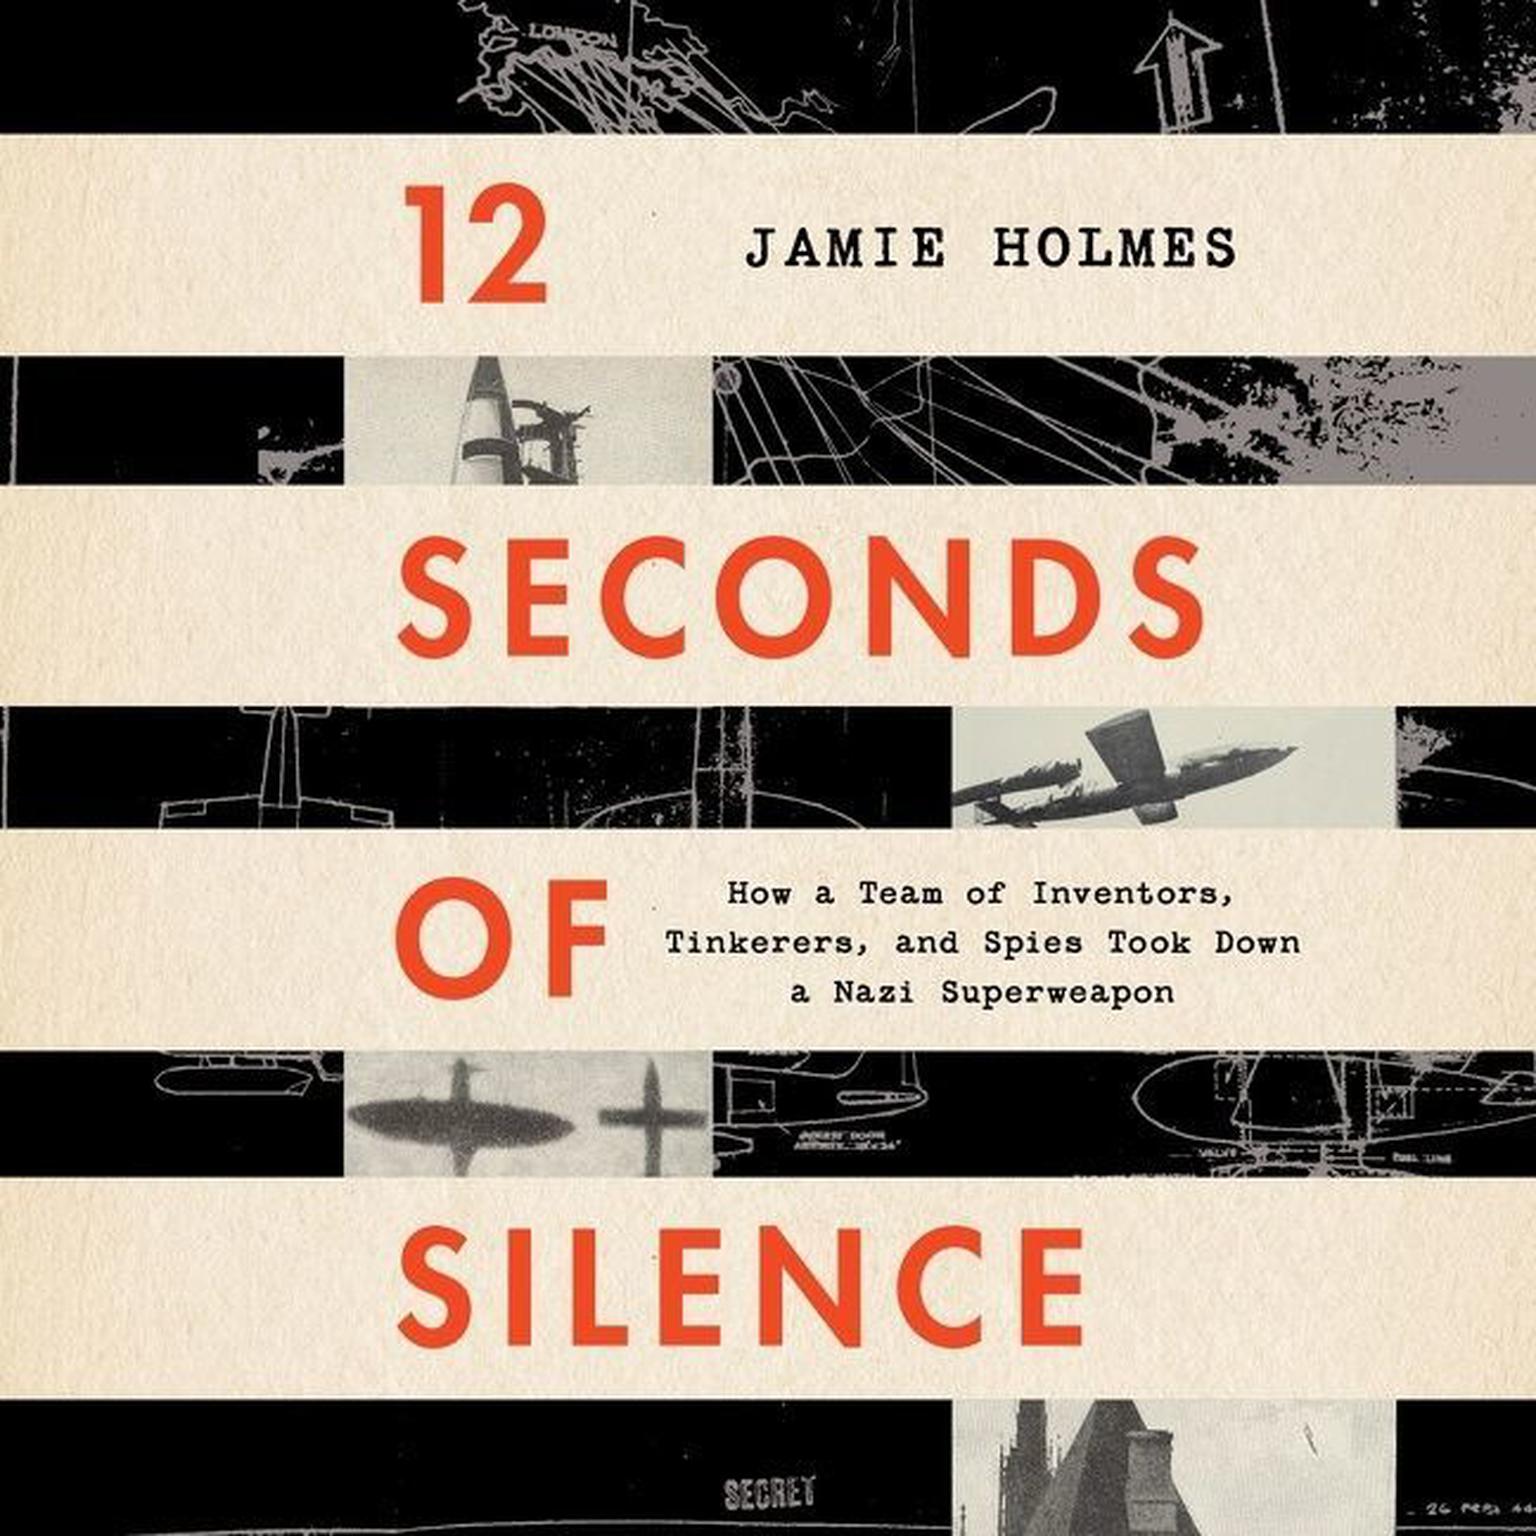 12 Seconds Of Silence: How a Team of Inventors, Tinkerers, and Spies Took Down a Nazi Superweapon Audiobook, by Jamie Holmes